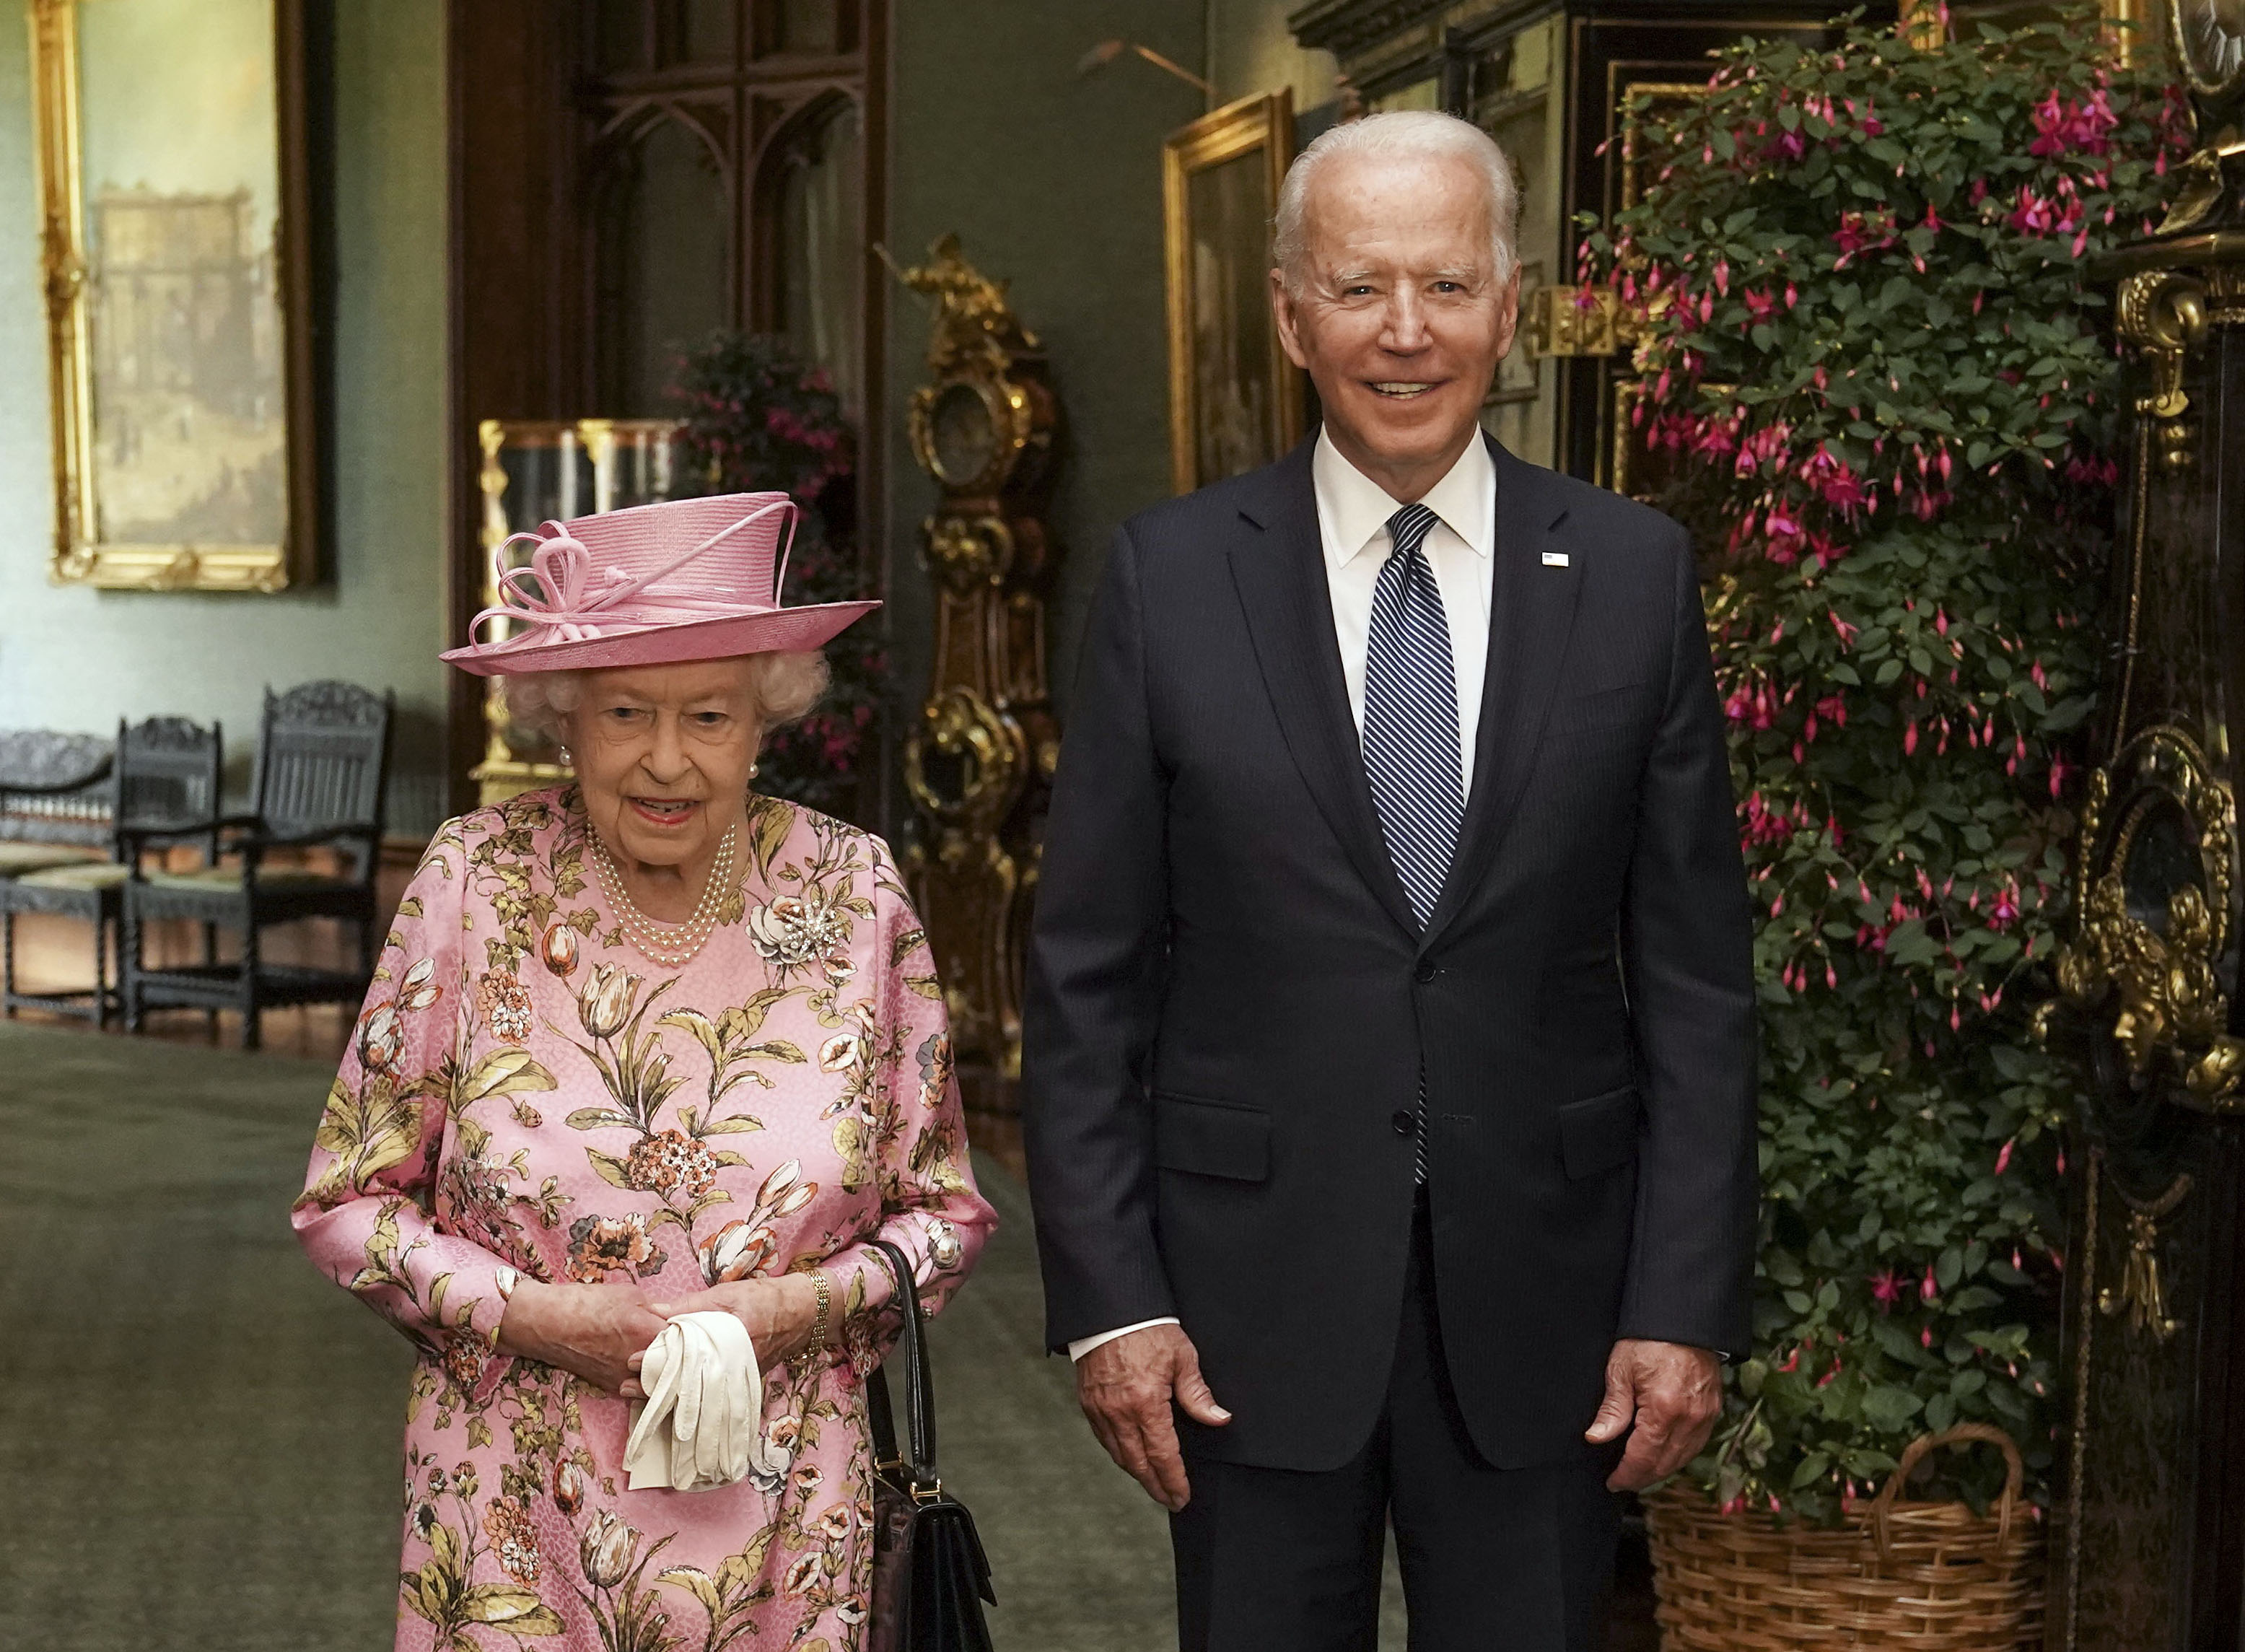 Queen Elizabeth poses for a photo with President Joe Biden during their visit to Windsor Castle in June 2021.